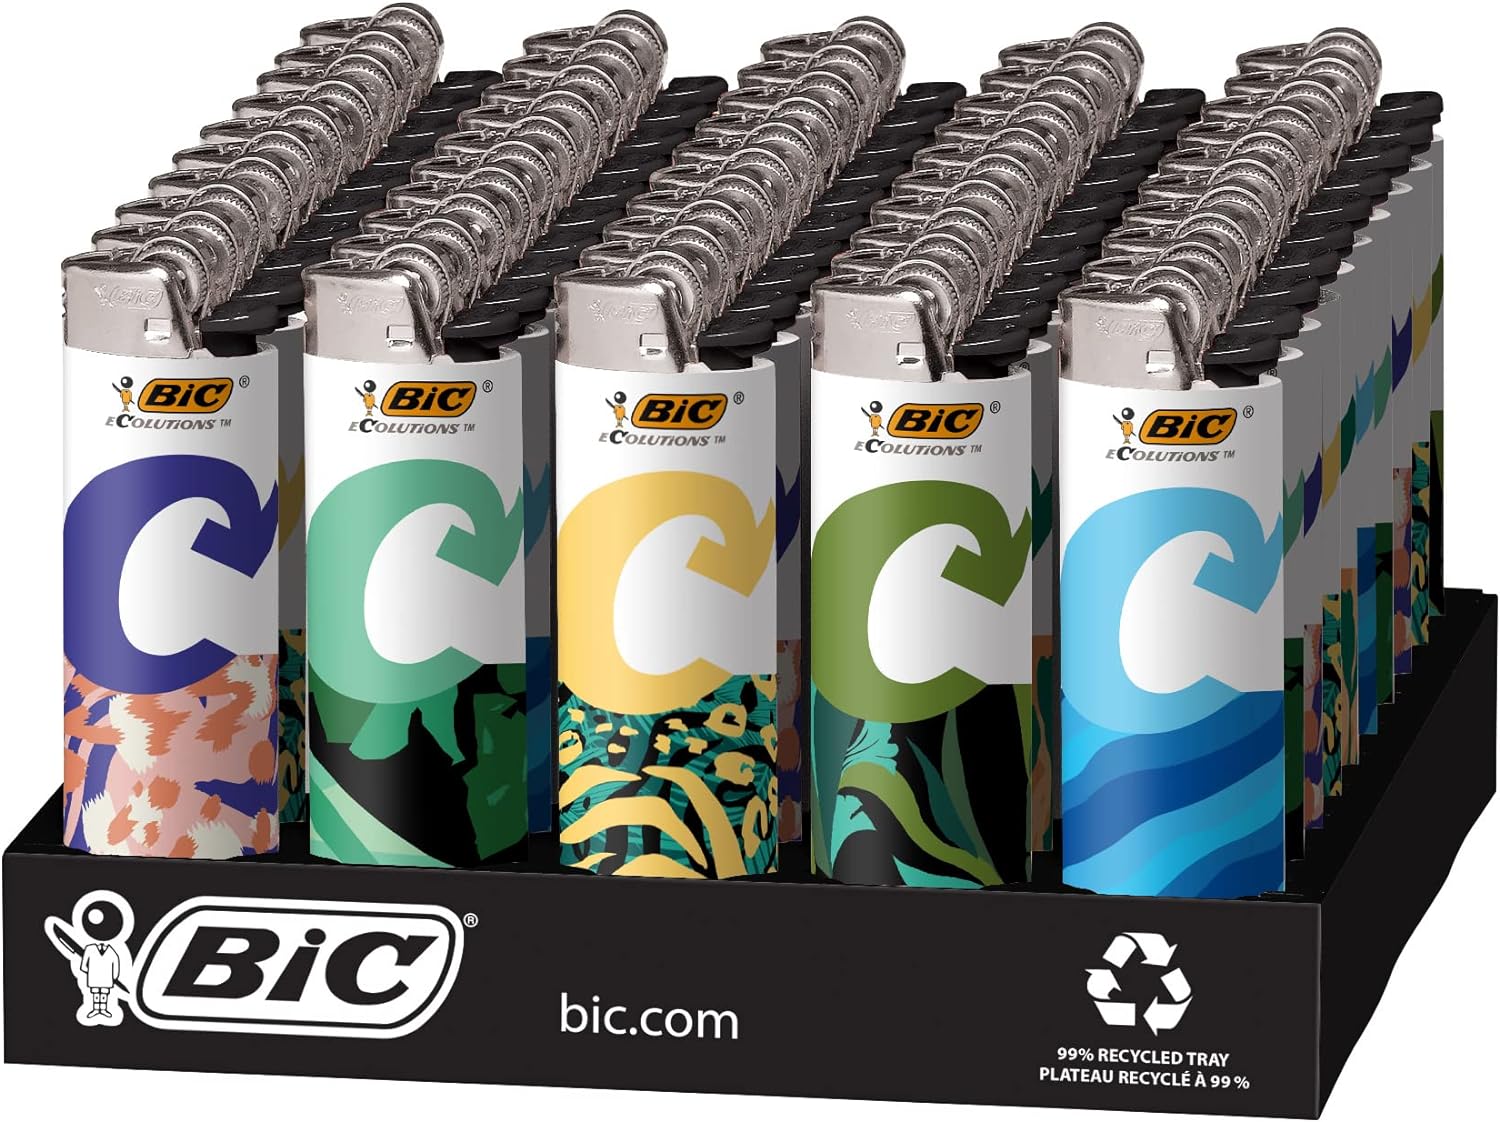 BIC Ecolutions Maxi Pocket Lighter, 50-Count Tray of Ecofriendly Candle Lighters, 55% Recycled Metal and 30% Carbon Offset